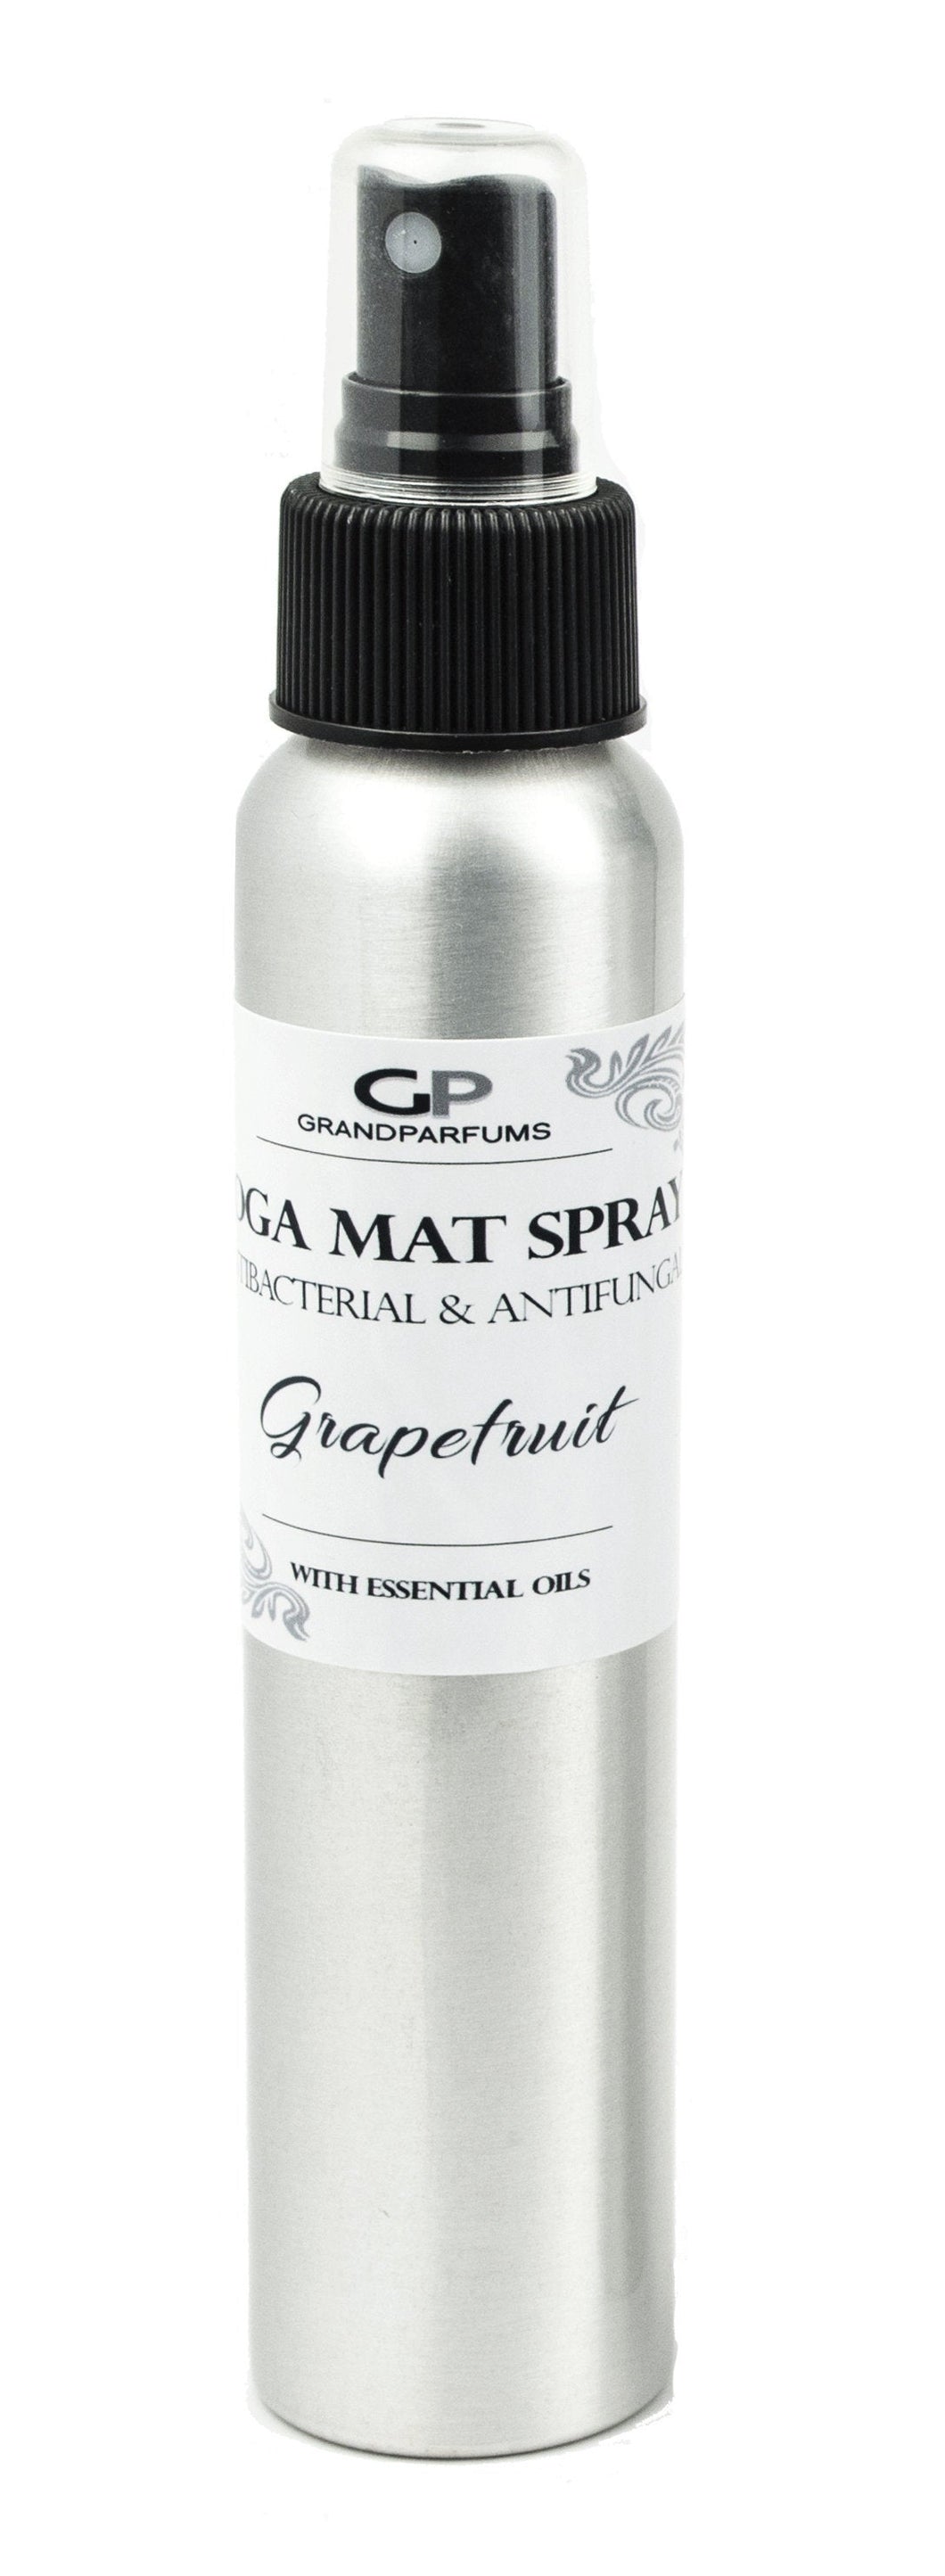 YOGA MAT CLEANSER Grapefruit Natural Organic Antibacterial Spray Mist With Essential Oils 4 Oz Many Fragrances to Choose From